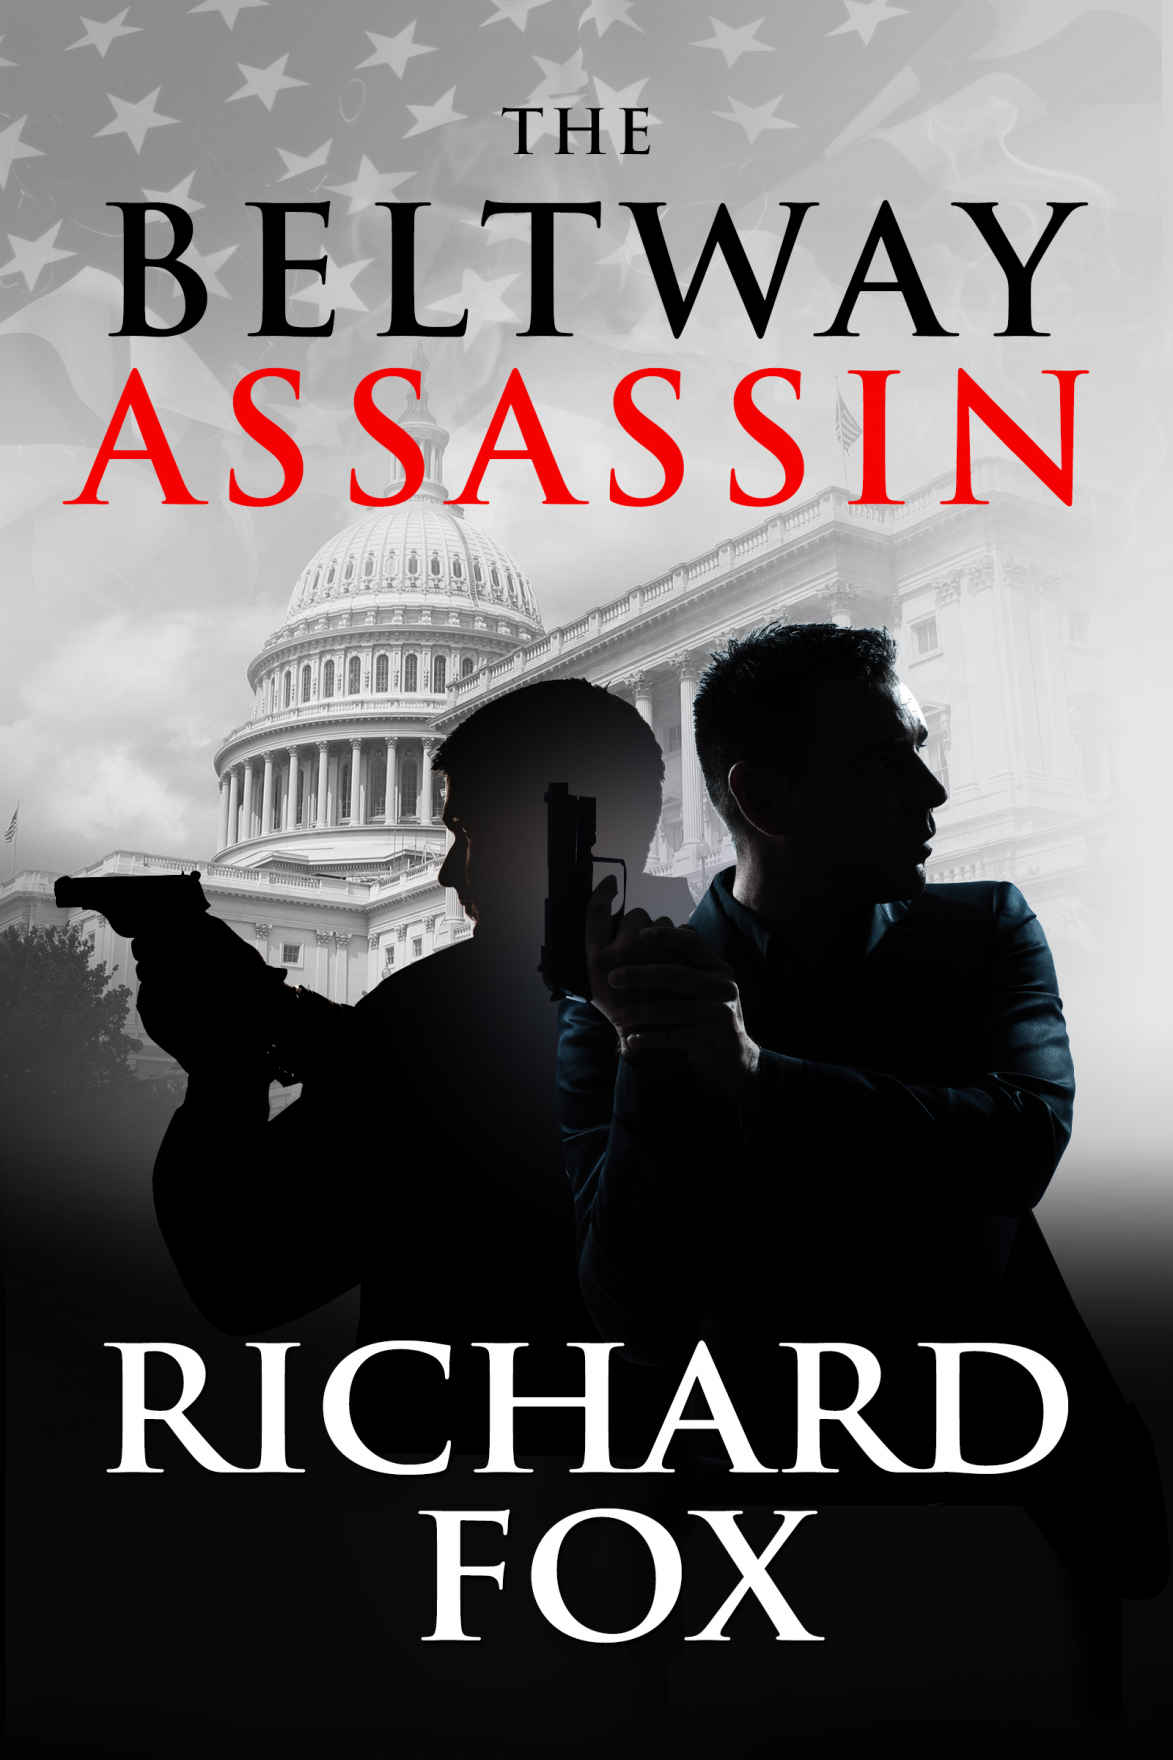 The Beltway Assassin by Richard Fox